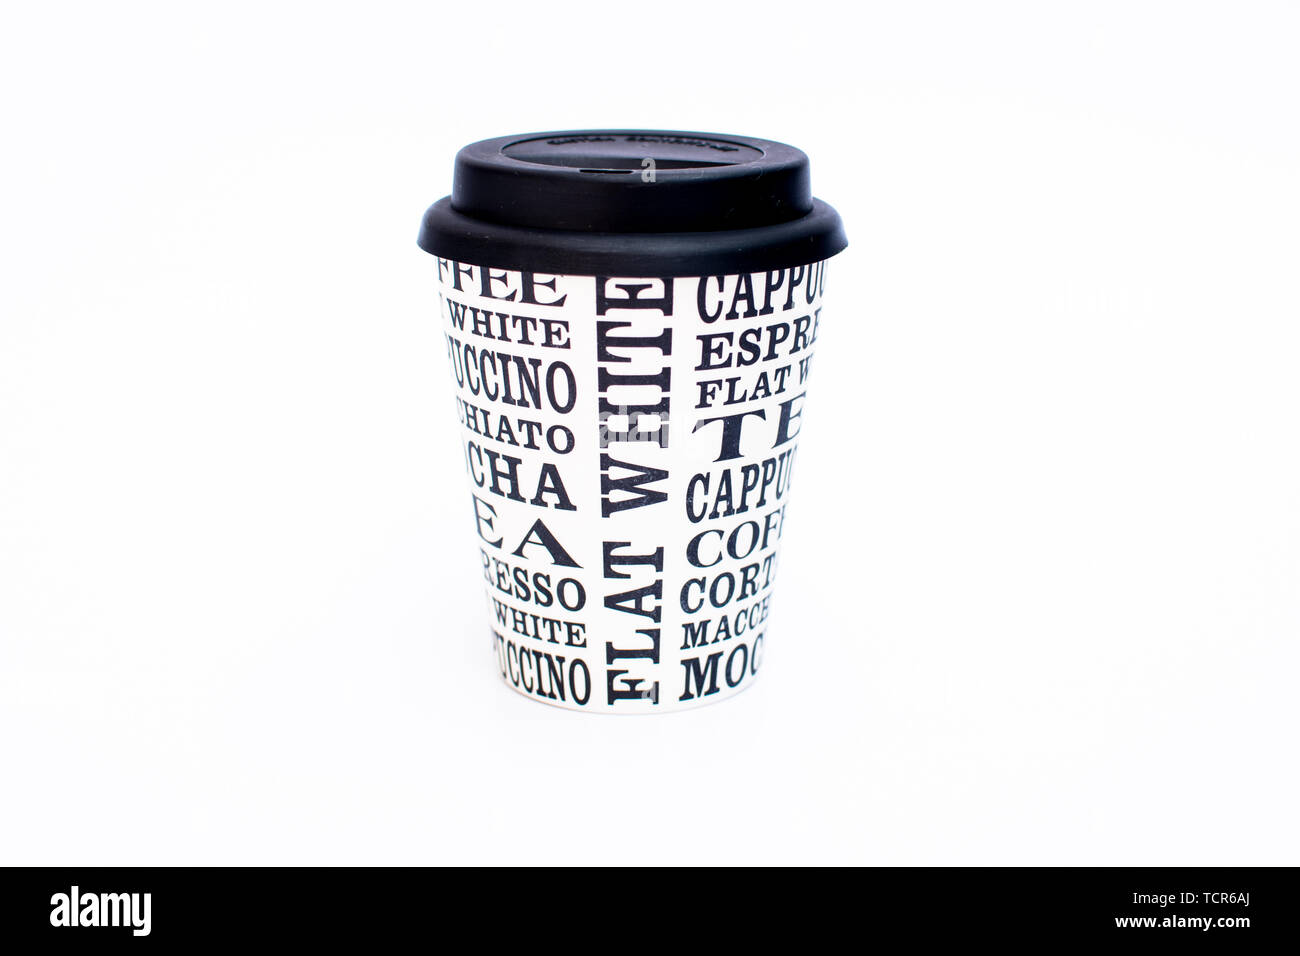 Reusable coffee take away cup made from bamboo pulp with varieties of coffee printed Stock Photo